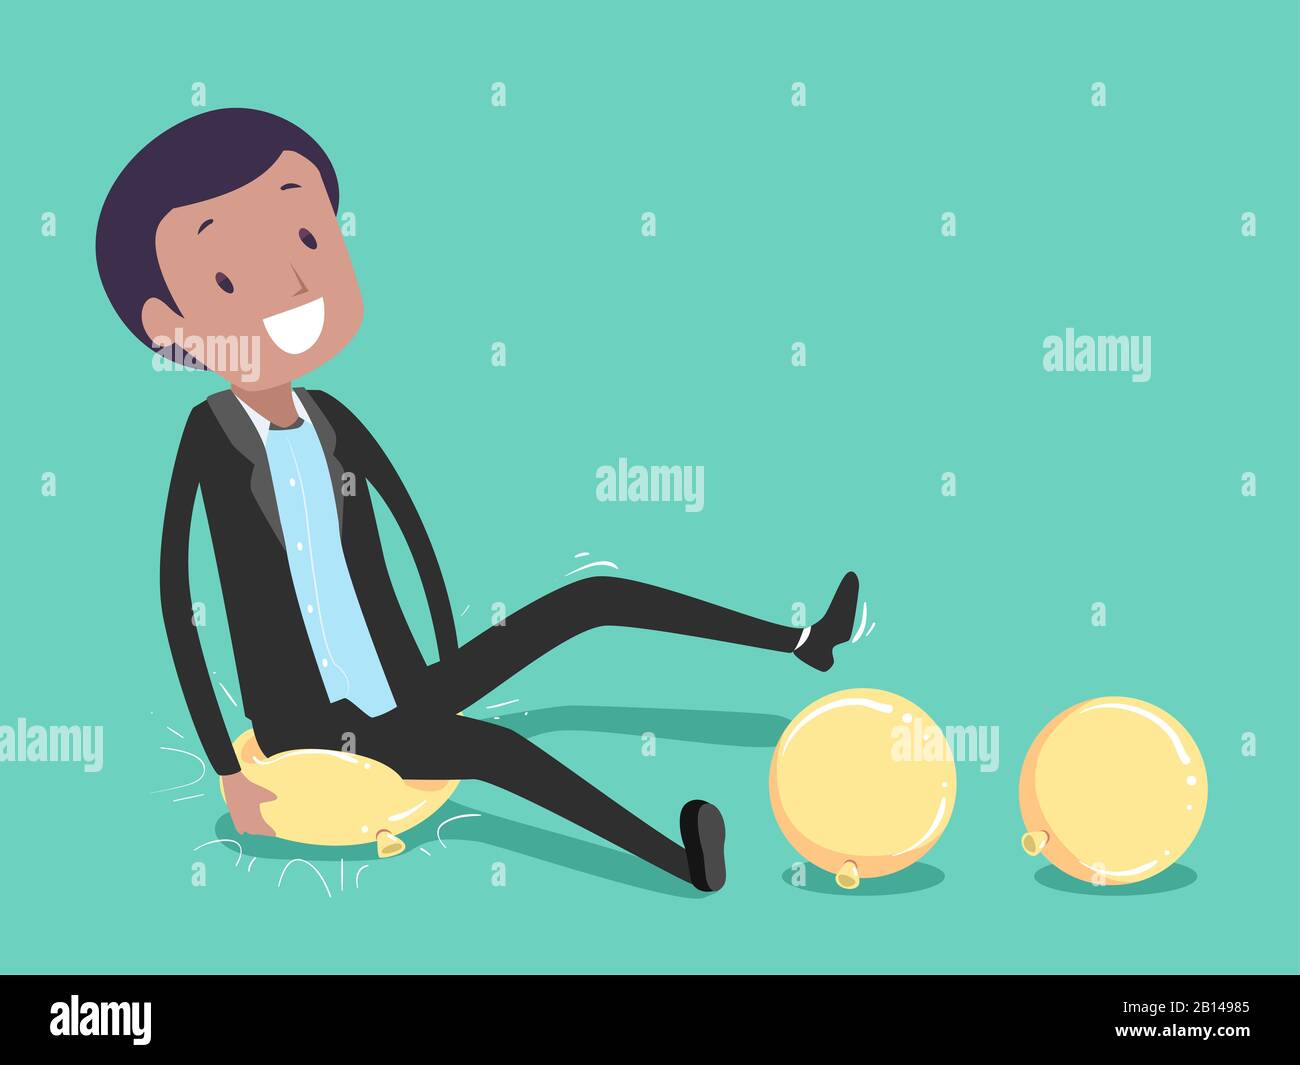 Illustration of a Man in Office Attire Popping Balloons by Sitting On Them In An Ice Breaker Game Stock Photo